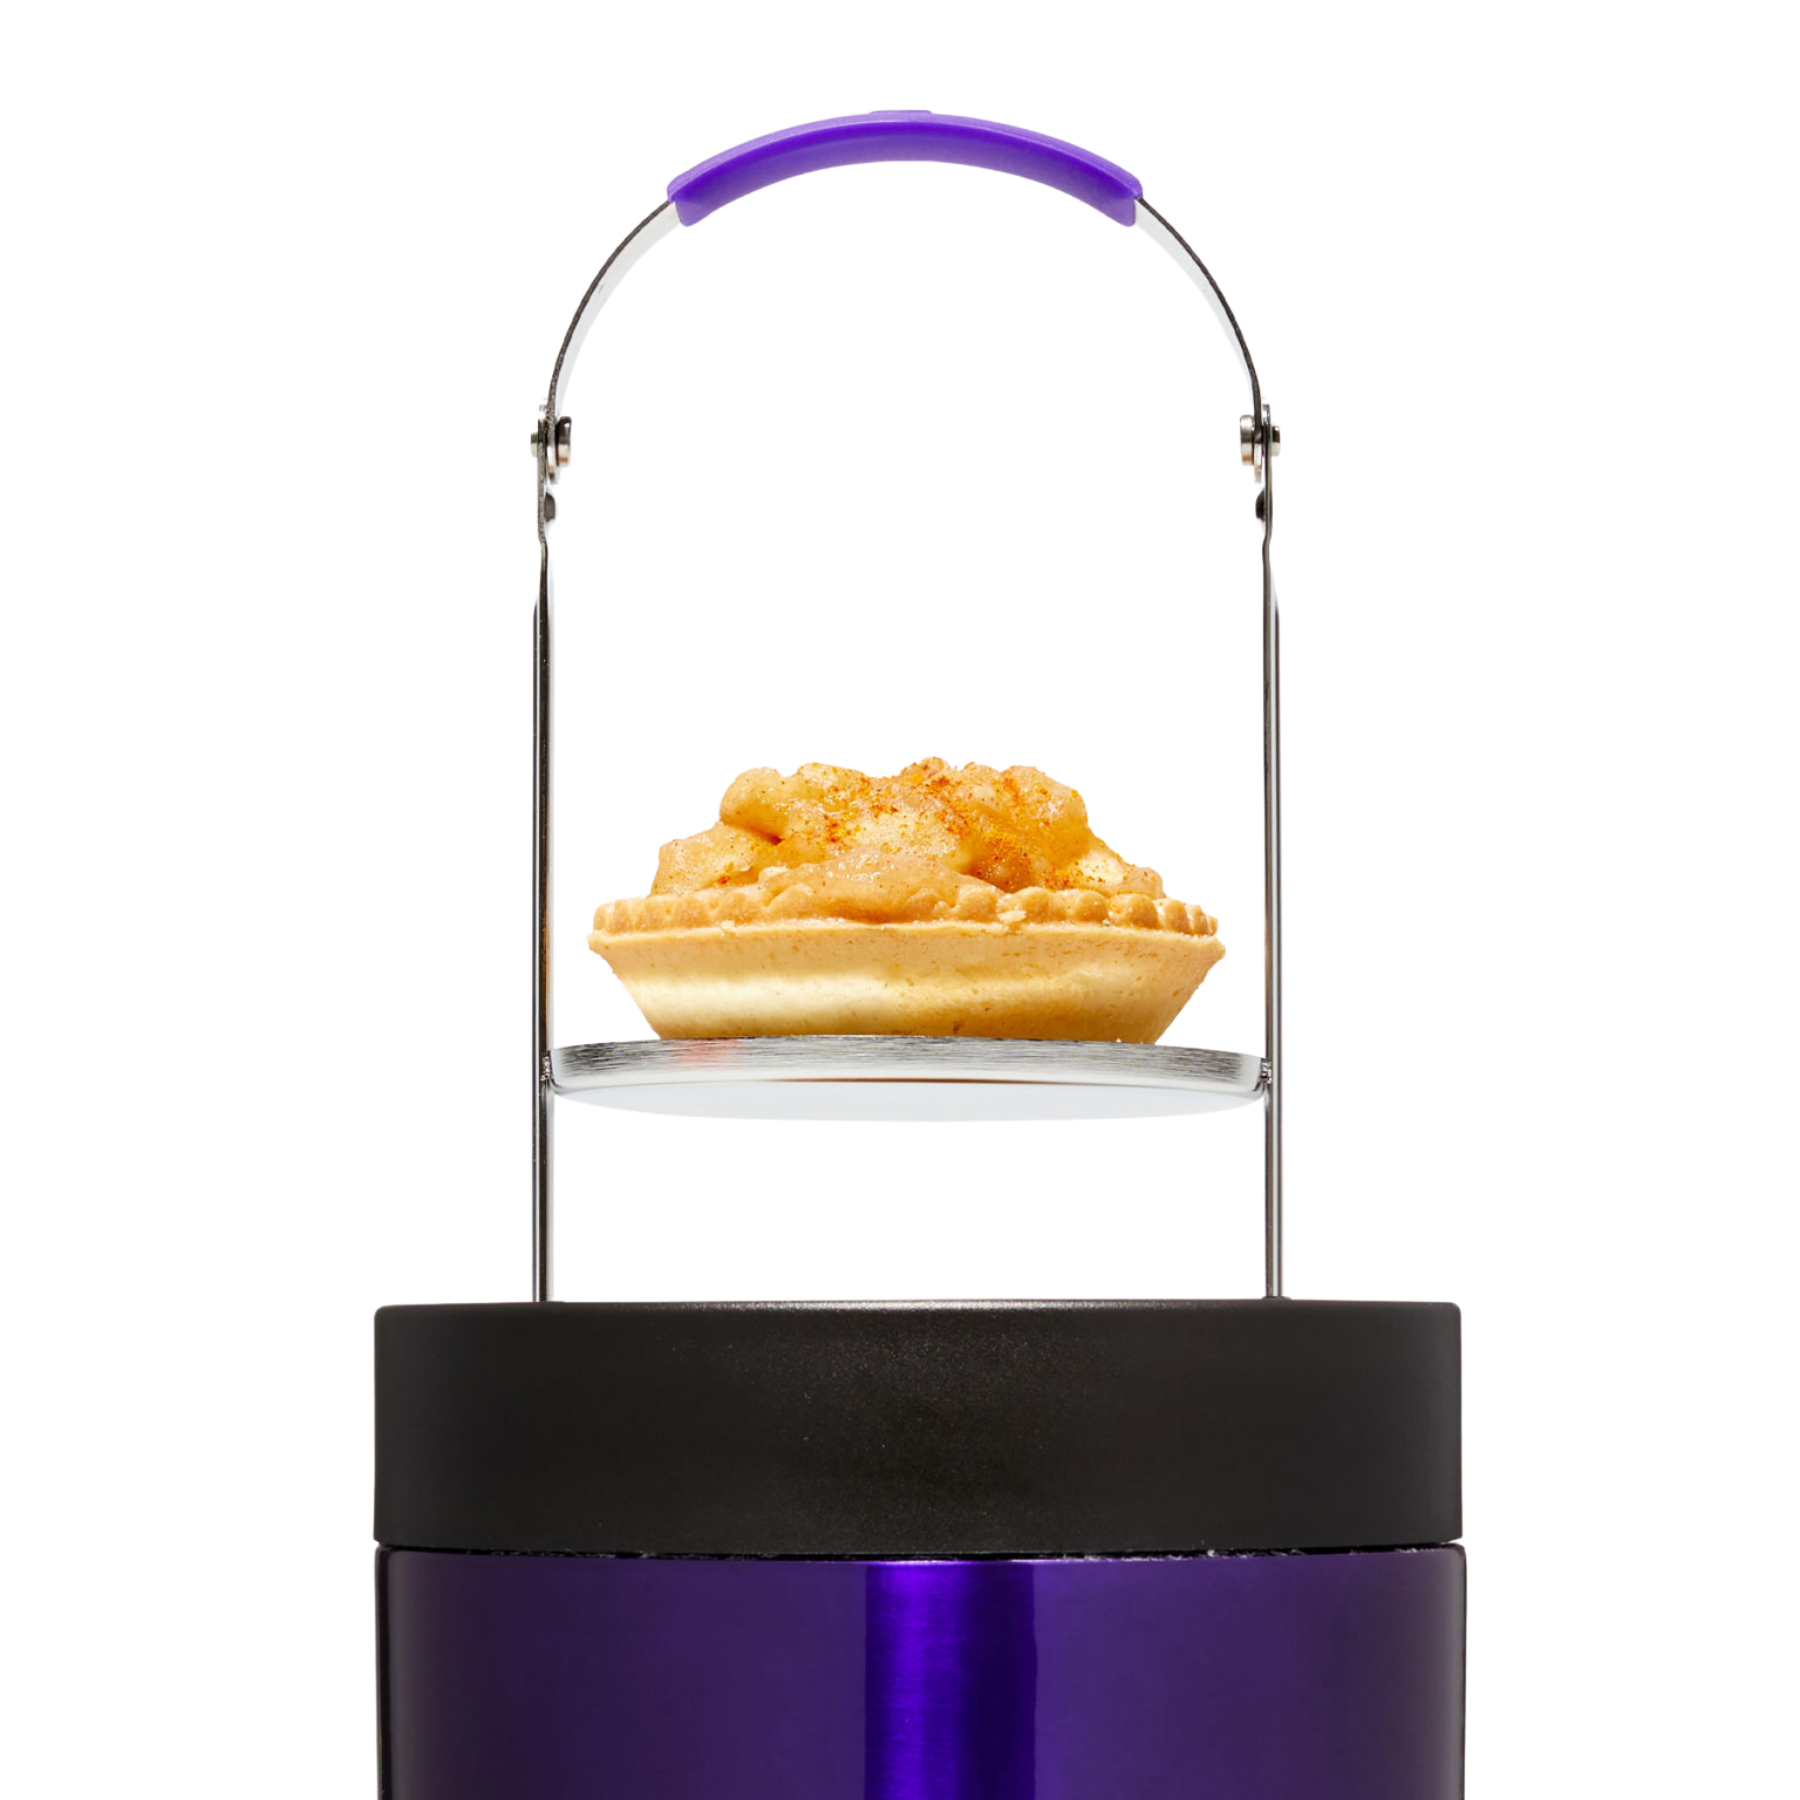 Ardent FX (Flex) Double Lifter inserted into the FX device with an apple pie on it, white background